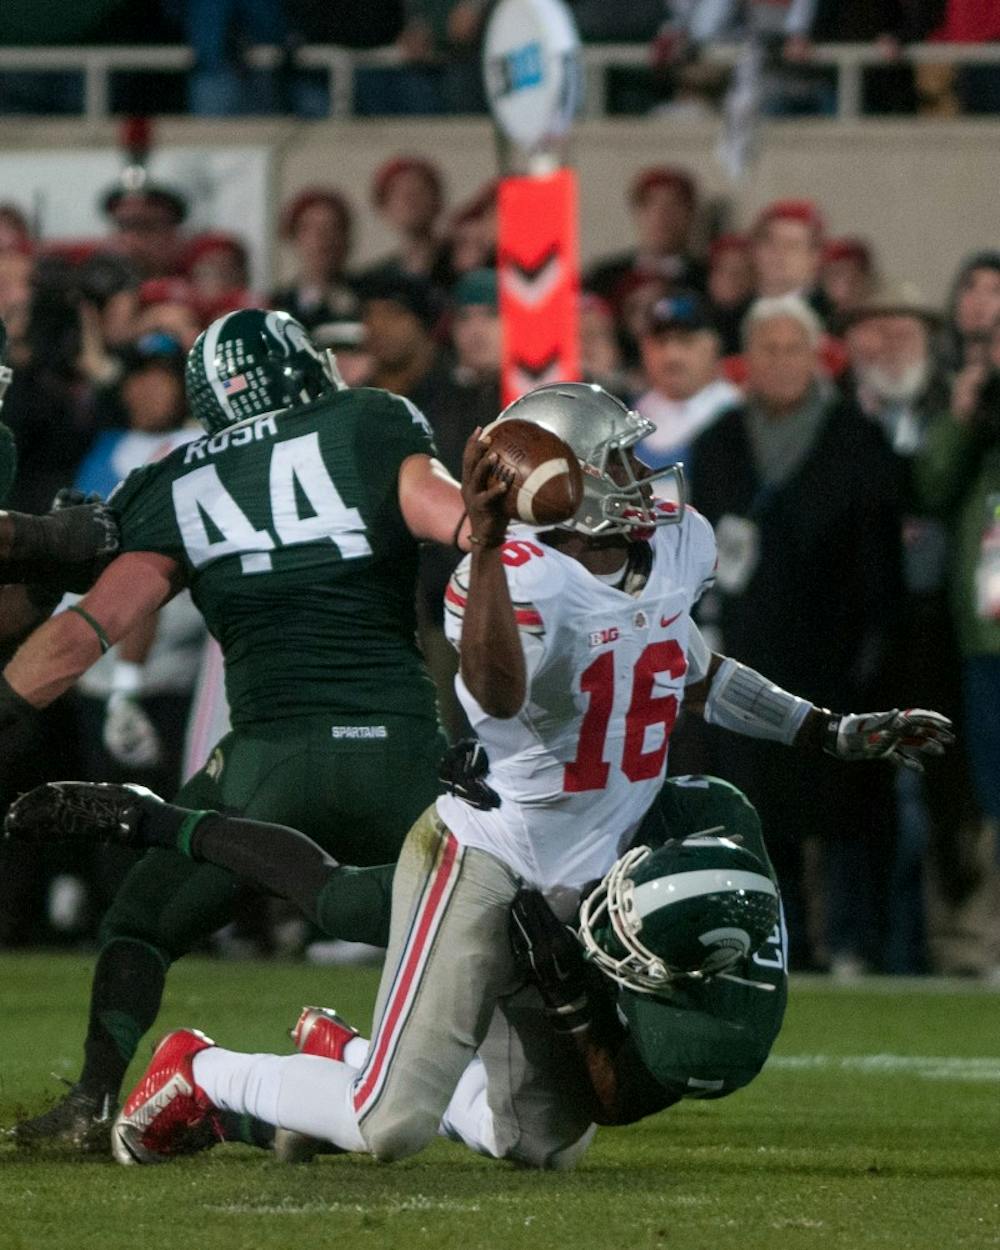 <p>Junior defensive lineman Joel Heath sacks Ohio State quarterback J.T. Barrett during the game against Ohio State on Nov. 8, 2014, at Spartan Stadium. The Spartans were defeated by the Buckeyes, 49-37. Raymond Williams/The State News</p>